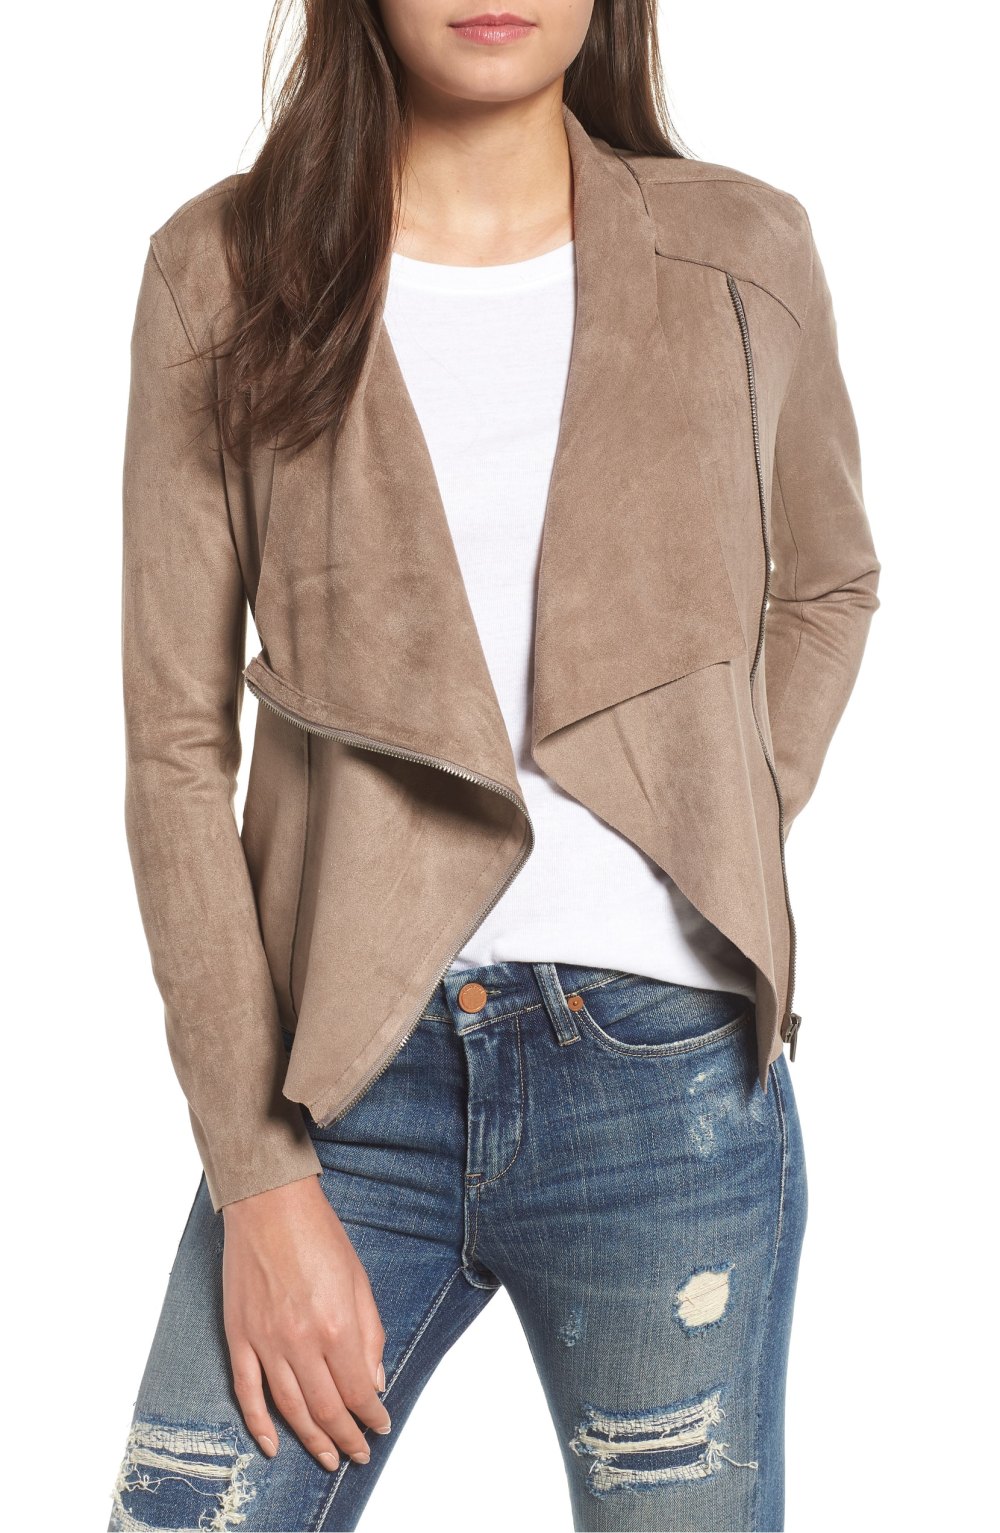 Shop the BlankNYC Faux Suede Jacket — Under $100